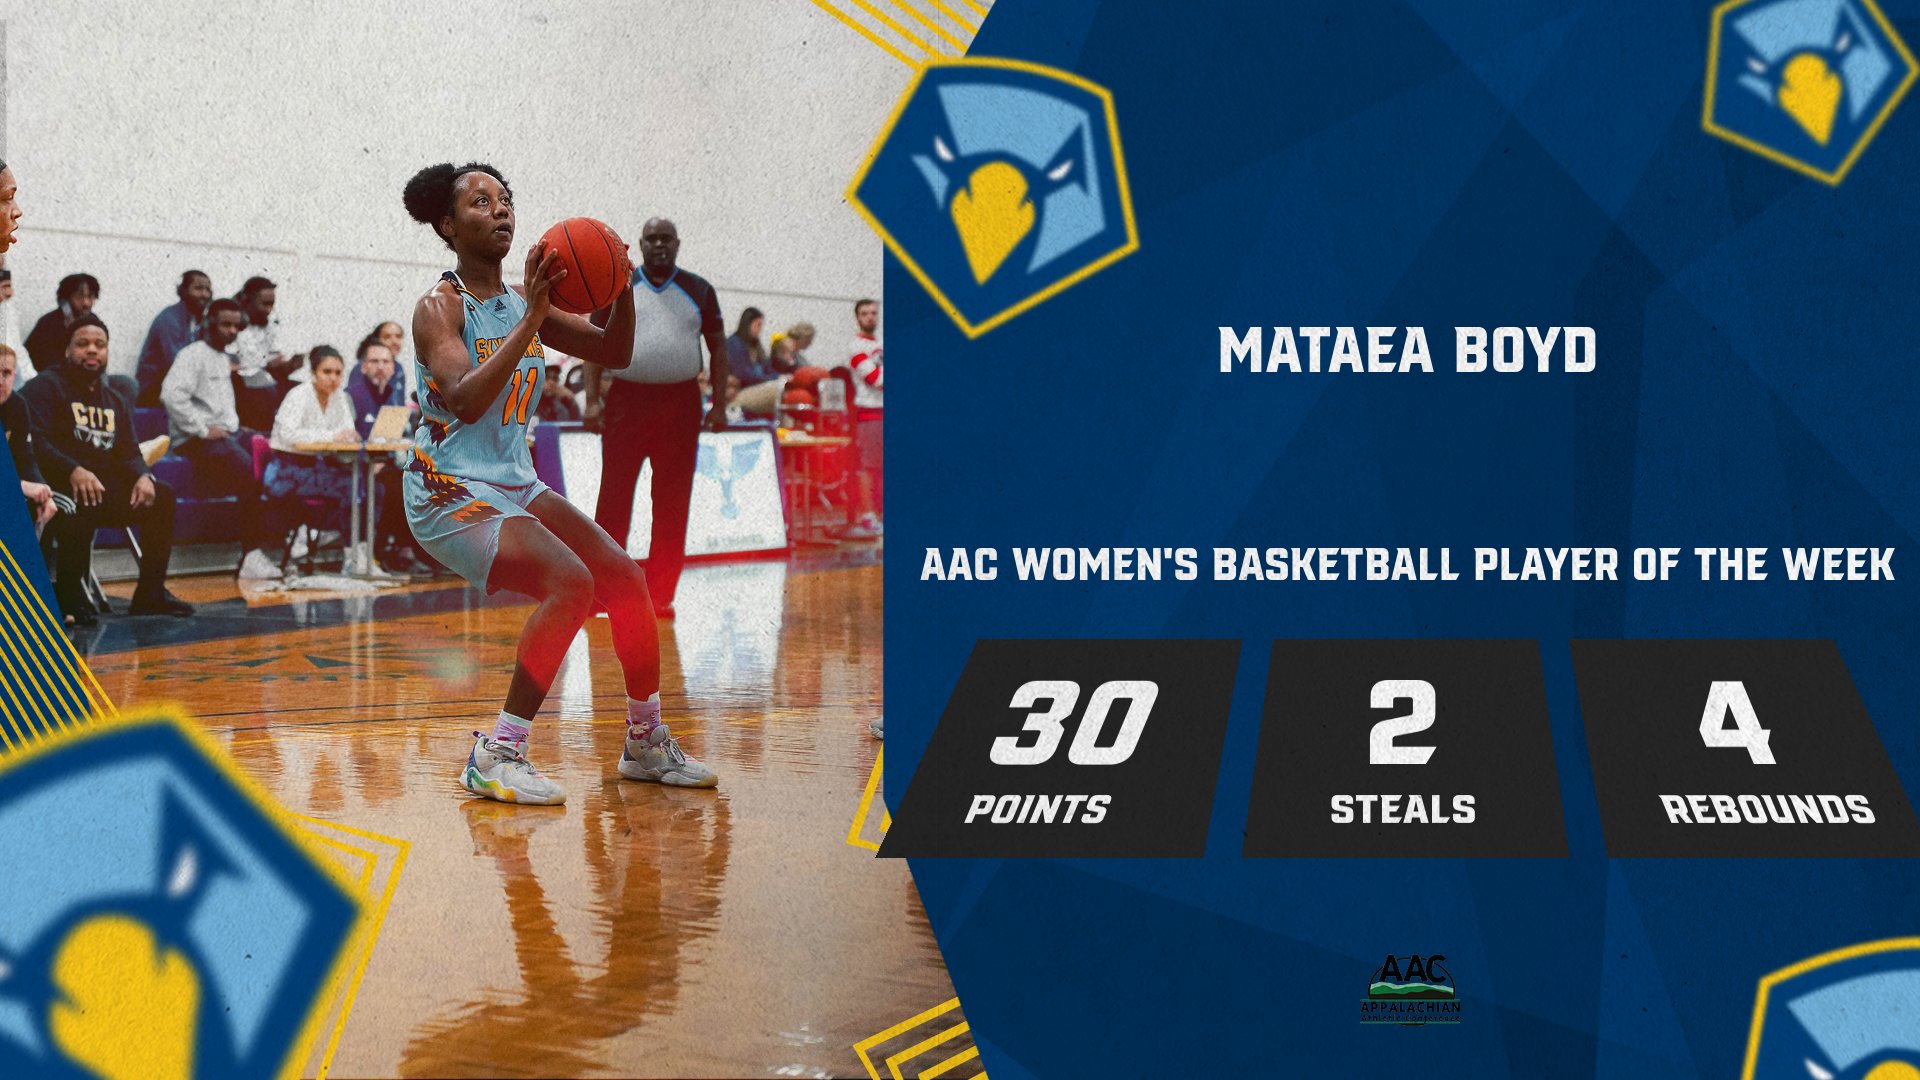 Mataea Boyd earns her first AAC Women’s Basketball Player of the Week honors